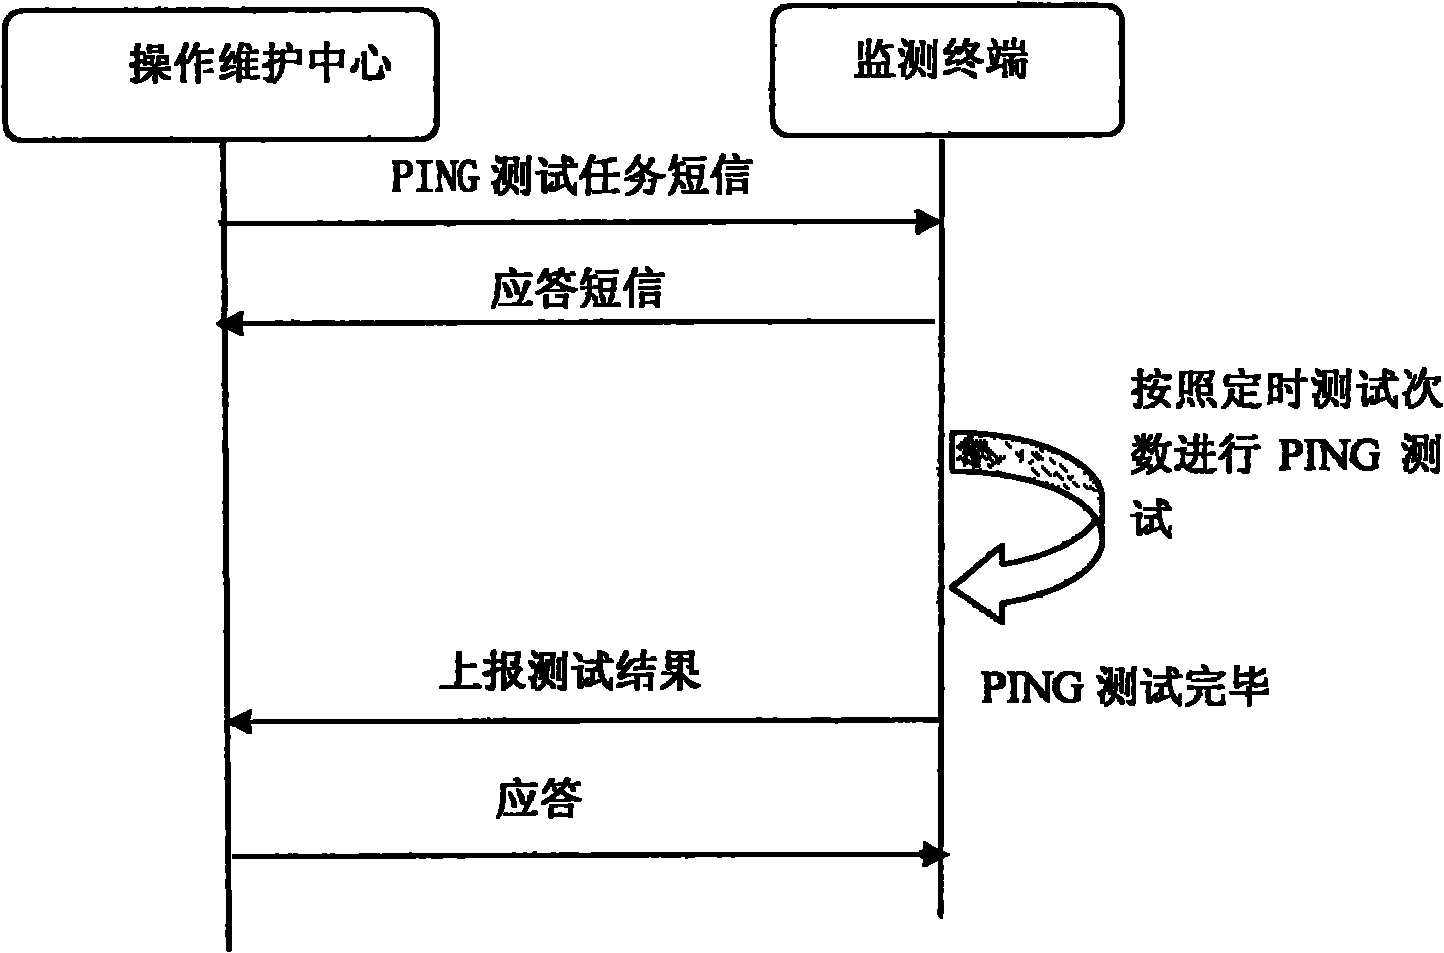 WLAN (Wireless Local Area Network) quality monitoring system and method and application